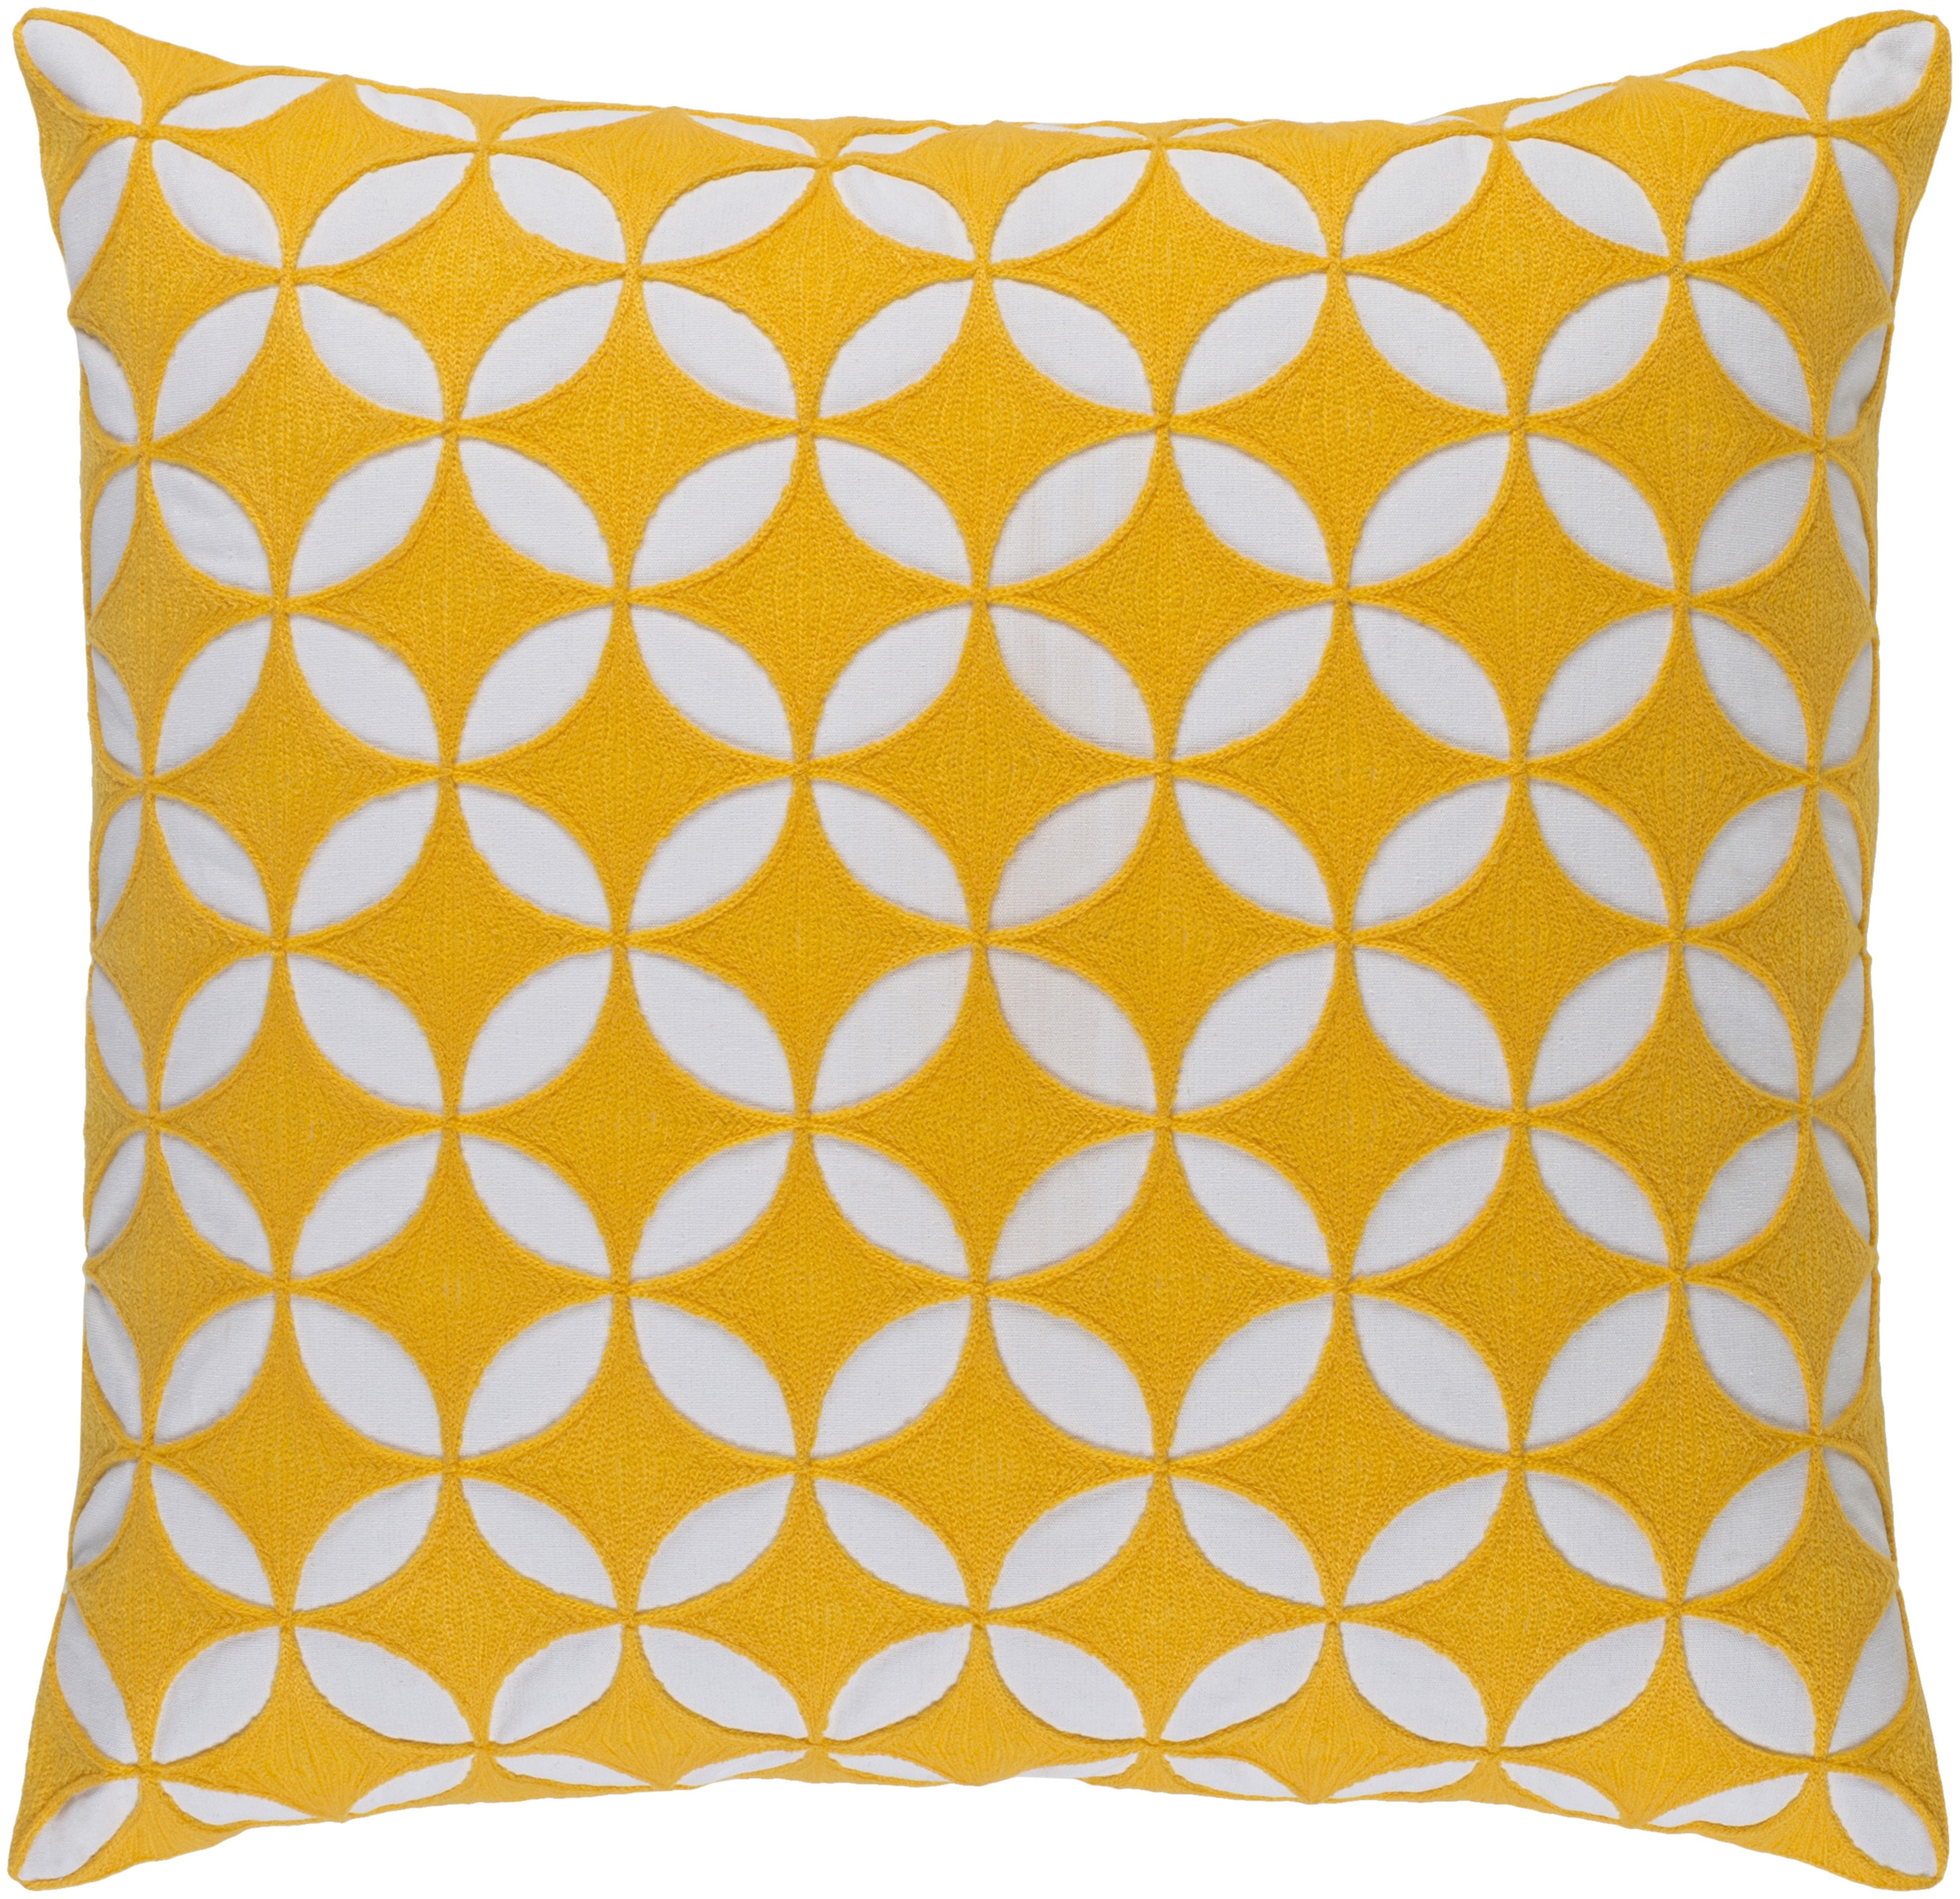 Perimeter Throw Pillow, 18" x 18", pillow cover only - Image 0